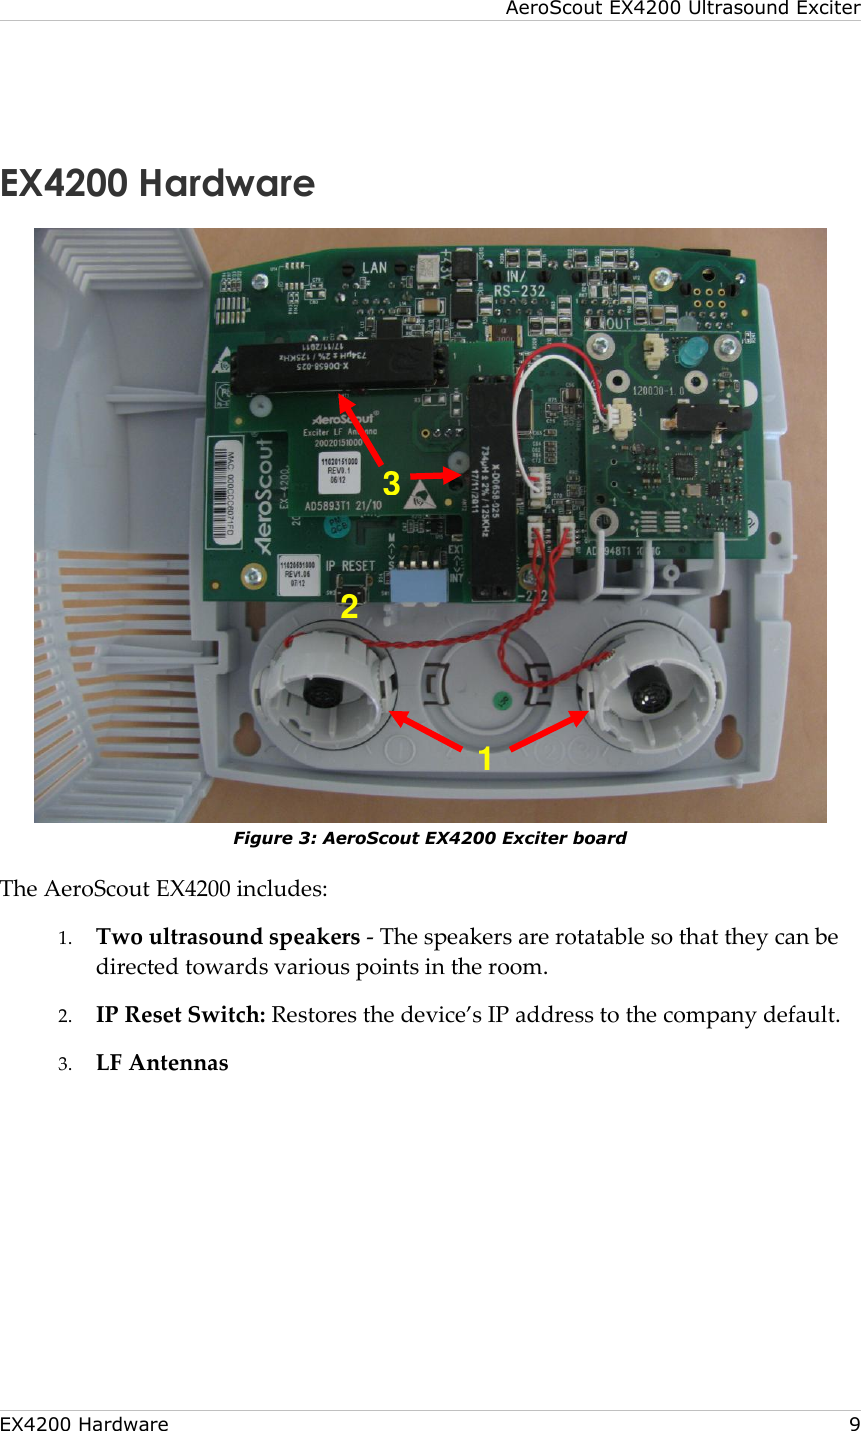 AeroScout EX4200 Ultrasound Exciter  EX4200 Hardware     9  EX4200 Hardware  Figure 3: AeroScout EX4200 Exciter board  The AeroScout EX4200 includes: 1. Two ultrasound speakers - The speakers are rotatable so that they can be directed towards various points in the room.  2. IP Reset Switch: Restores the device’s IP address to the company default. 3. LF Antennas 2 3 1 